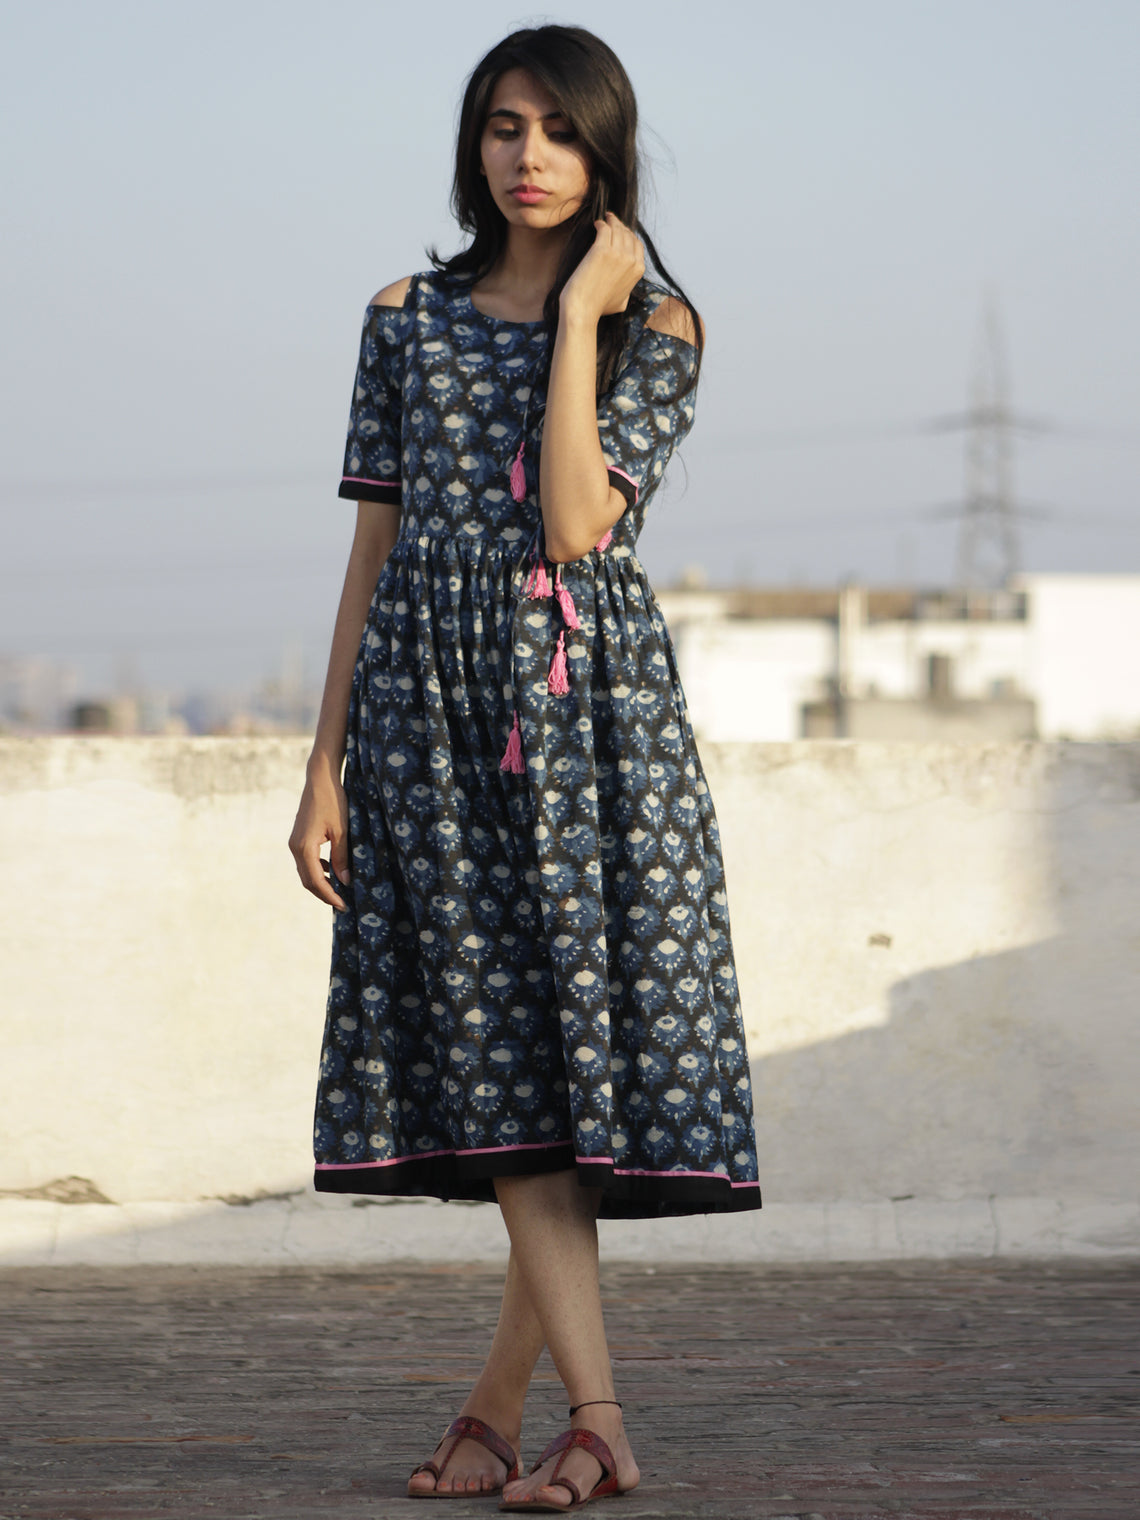 Indigo Black Ivory Pink Hand Block Printed Dress With Cold Shoulders A ...